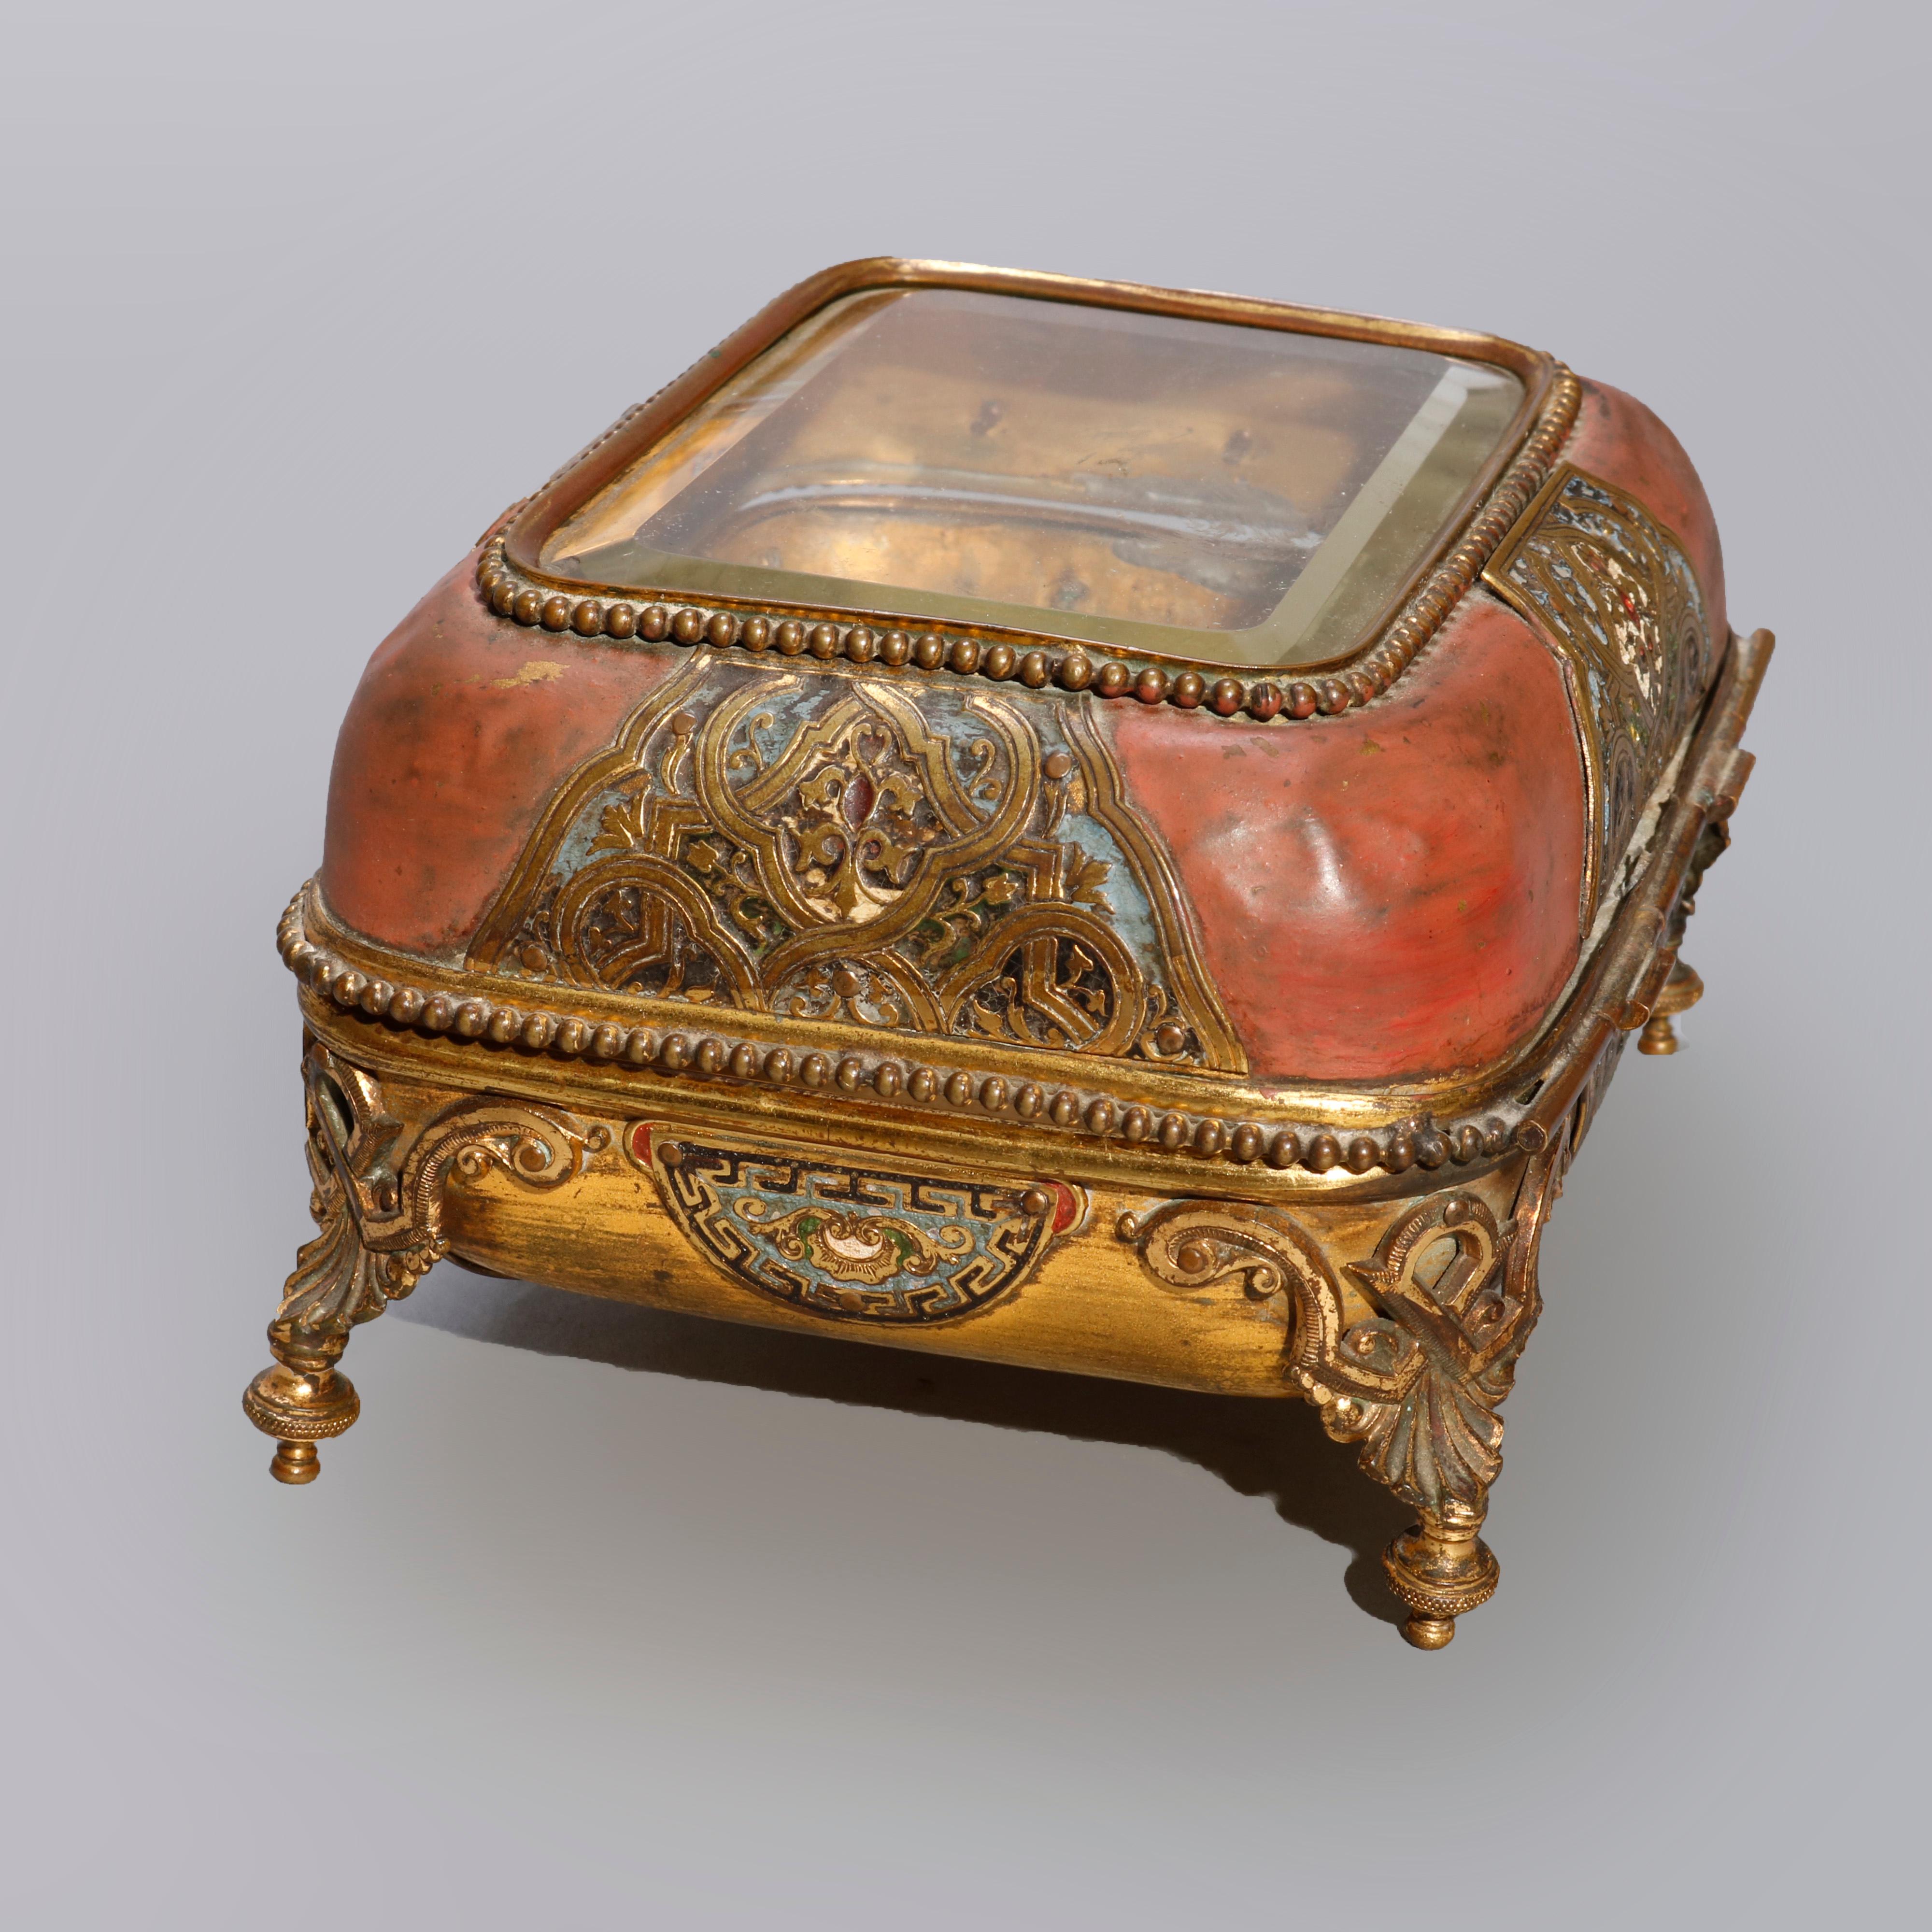 An antique French Empire dresser box offers bronze box with top having beveled glass viewing panel with beaded trim, box with Champleve enamel reserves of Moorish design, raised on acanthus form legs terminating in Marseille bun feet, interior